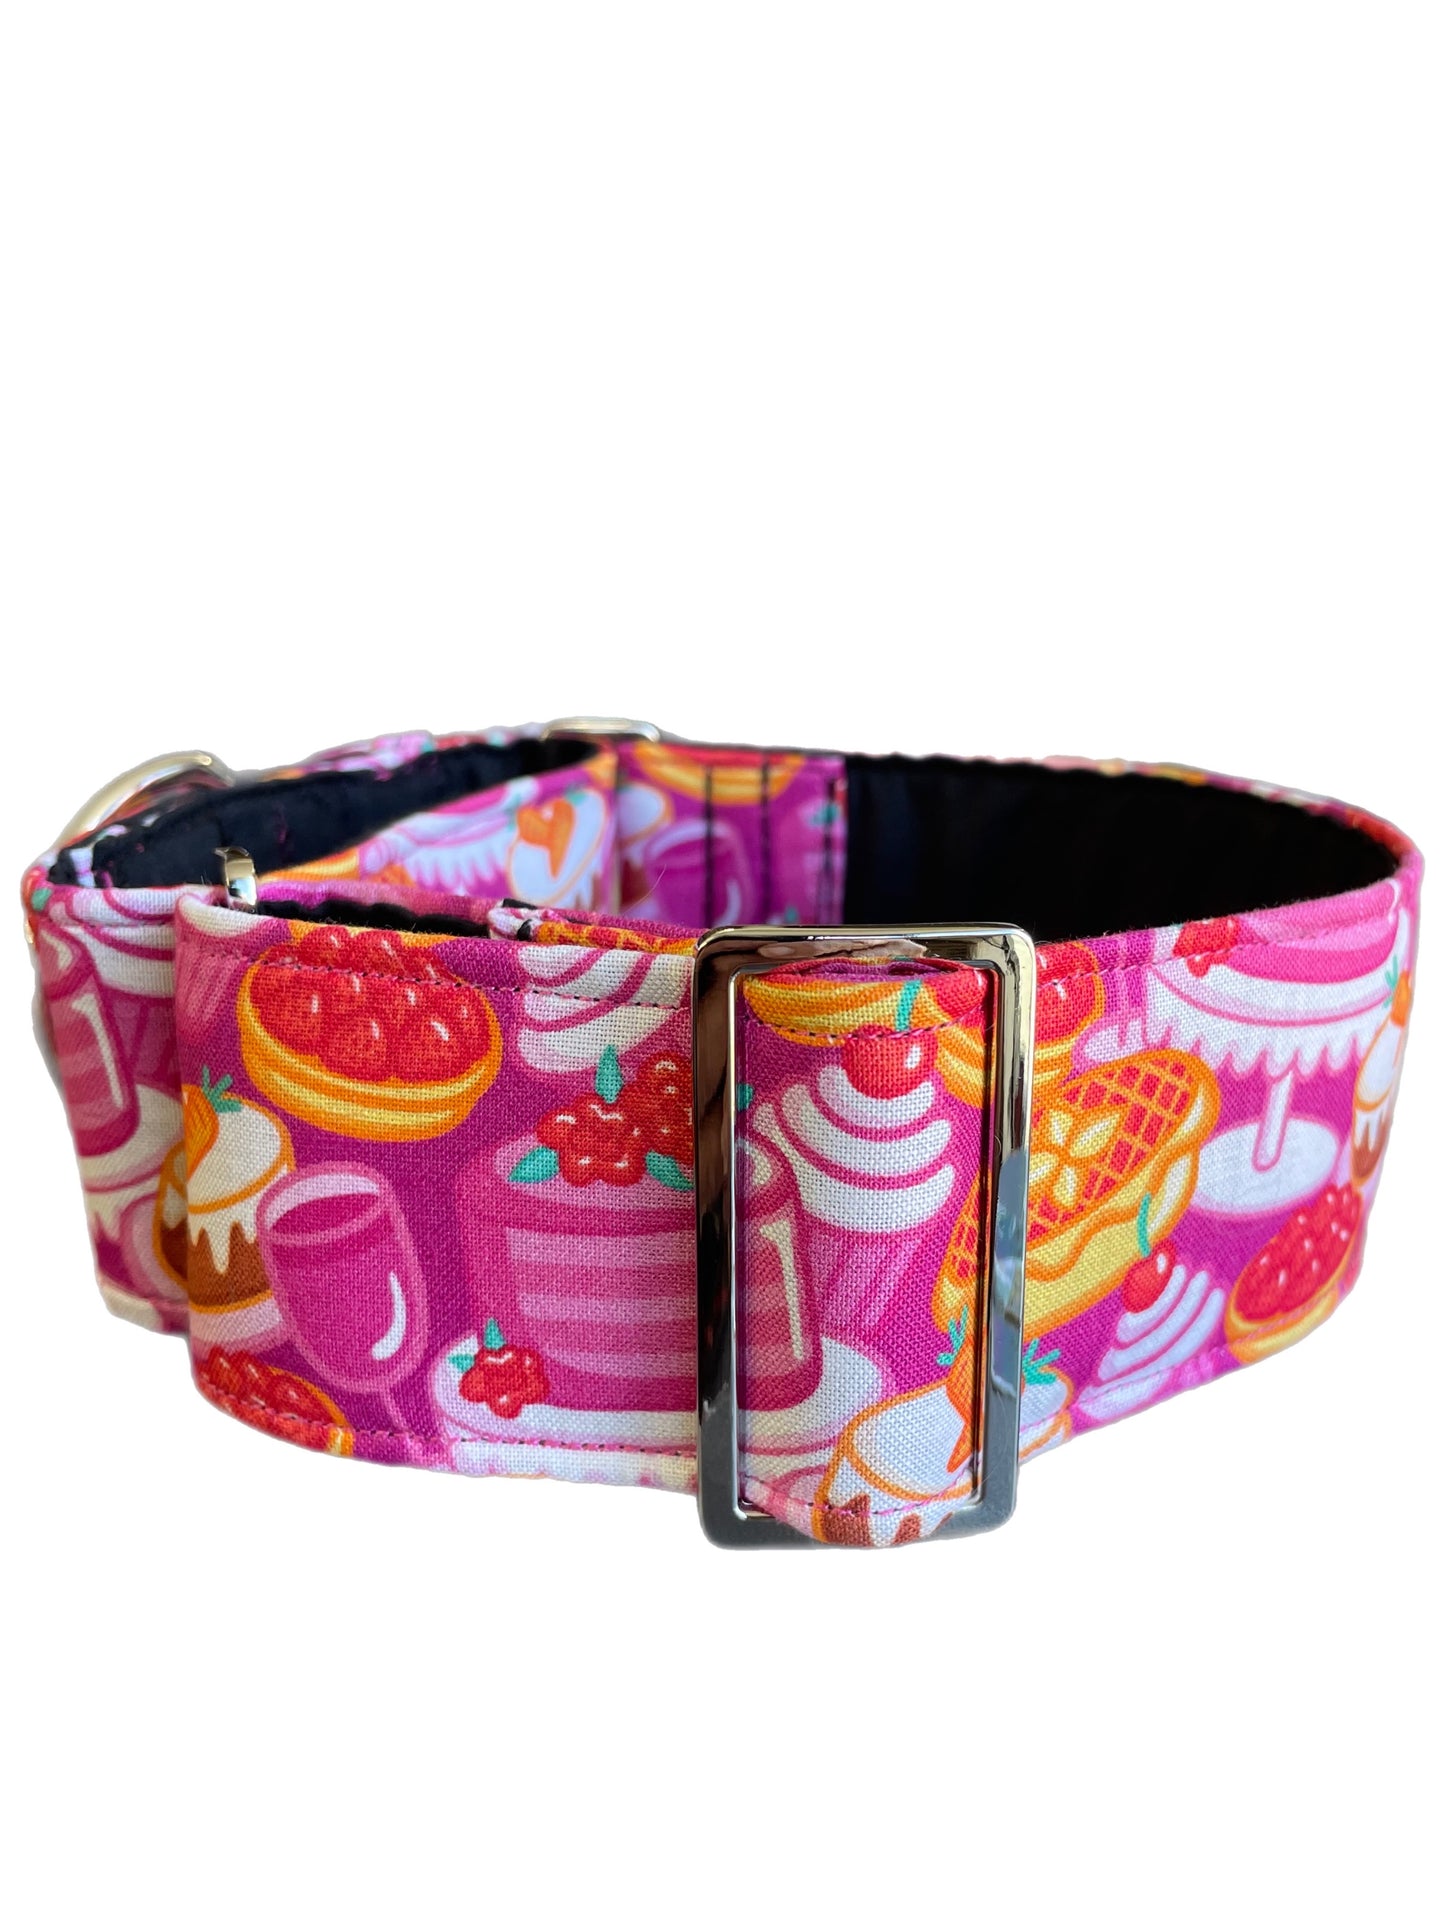 Pink cupcakes and tarts Greyhound Martingale collar cotton covered 50mm width super soft